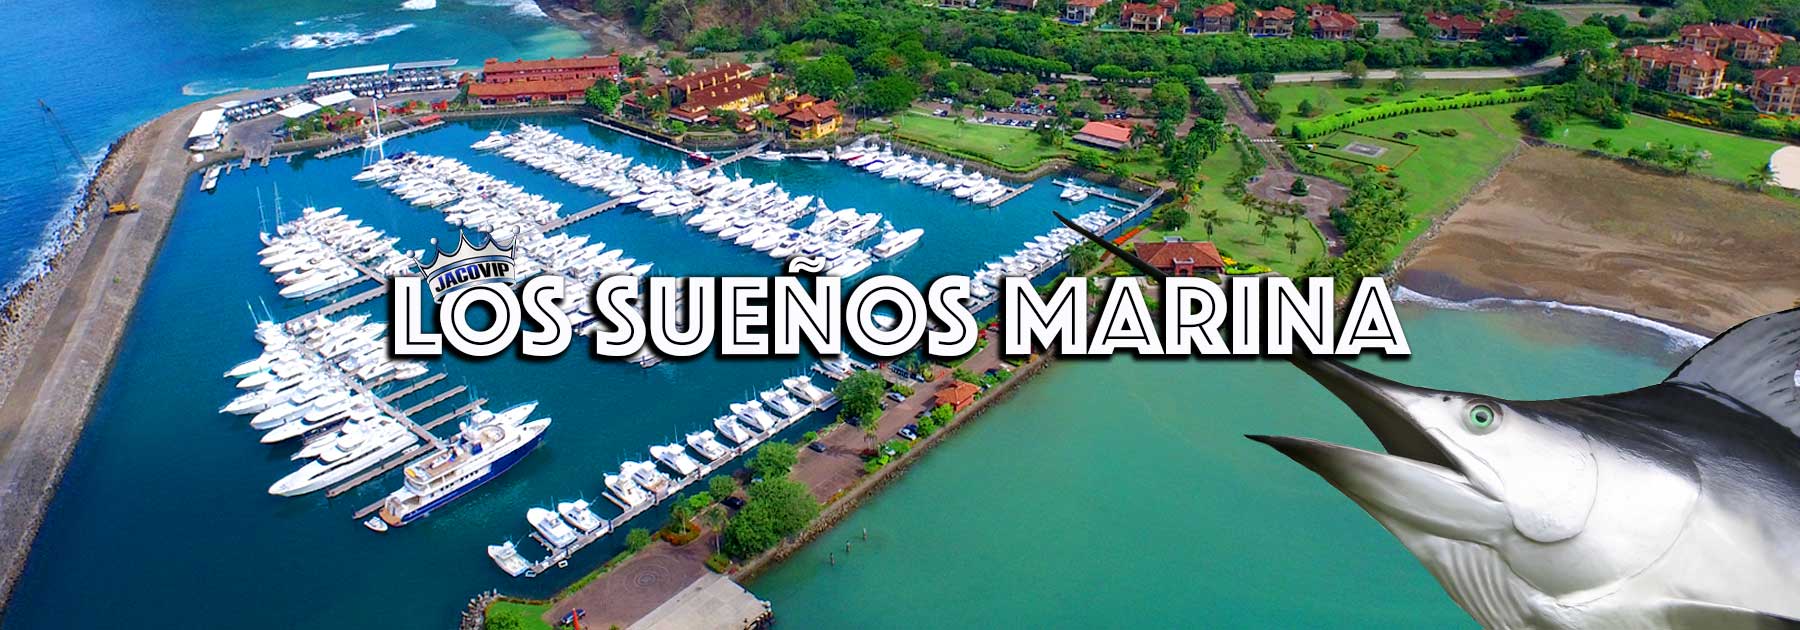 View of Los Sueños Marina in Costa Rica with many sport fishing boats docked